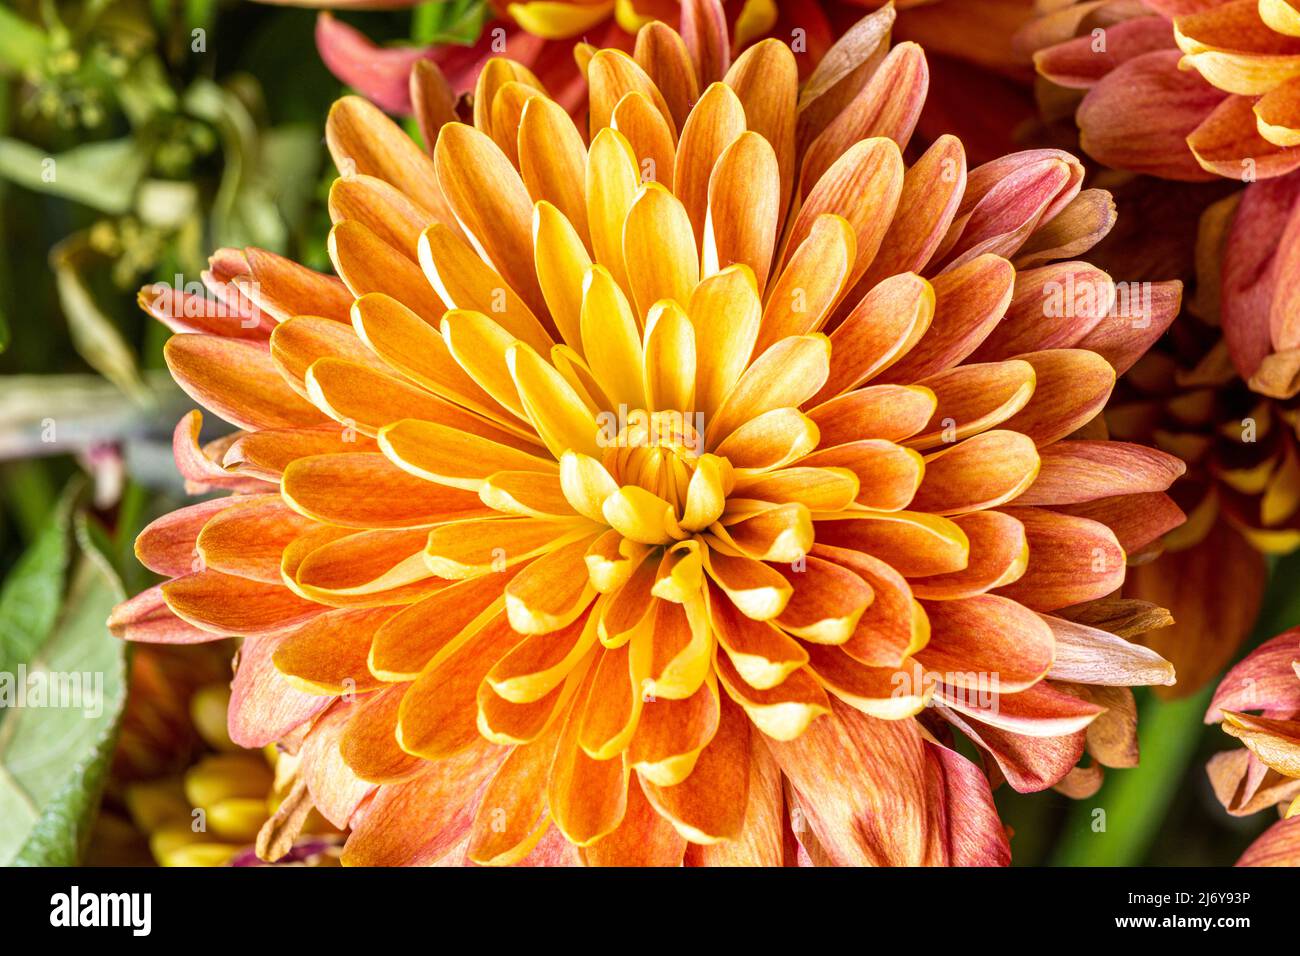 Beautiful and colorful blooming Chrysanthemum flowers, close up, ready for Spring. Stock Photo